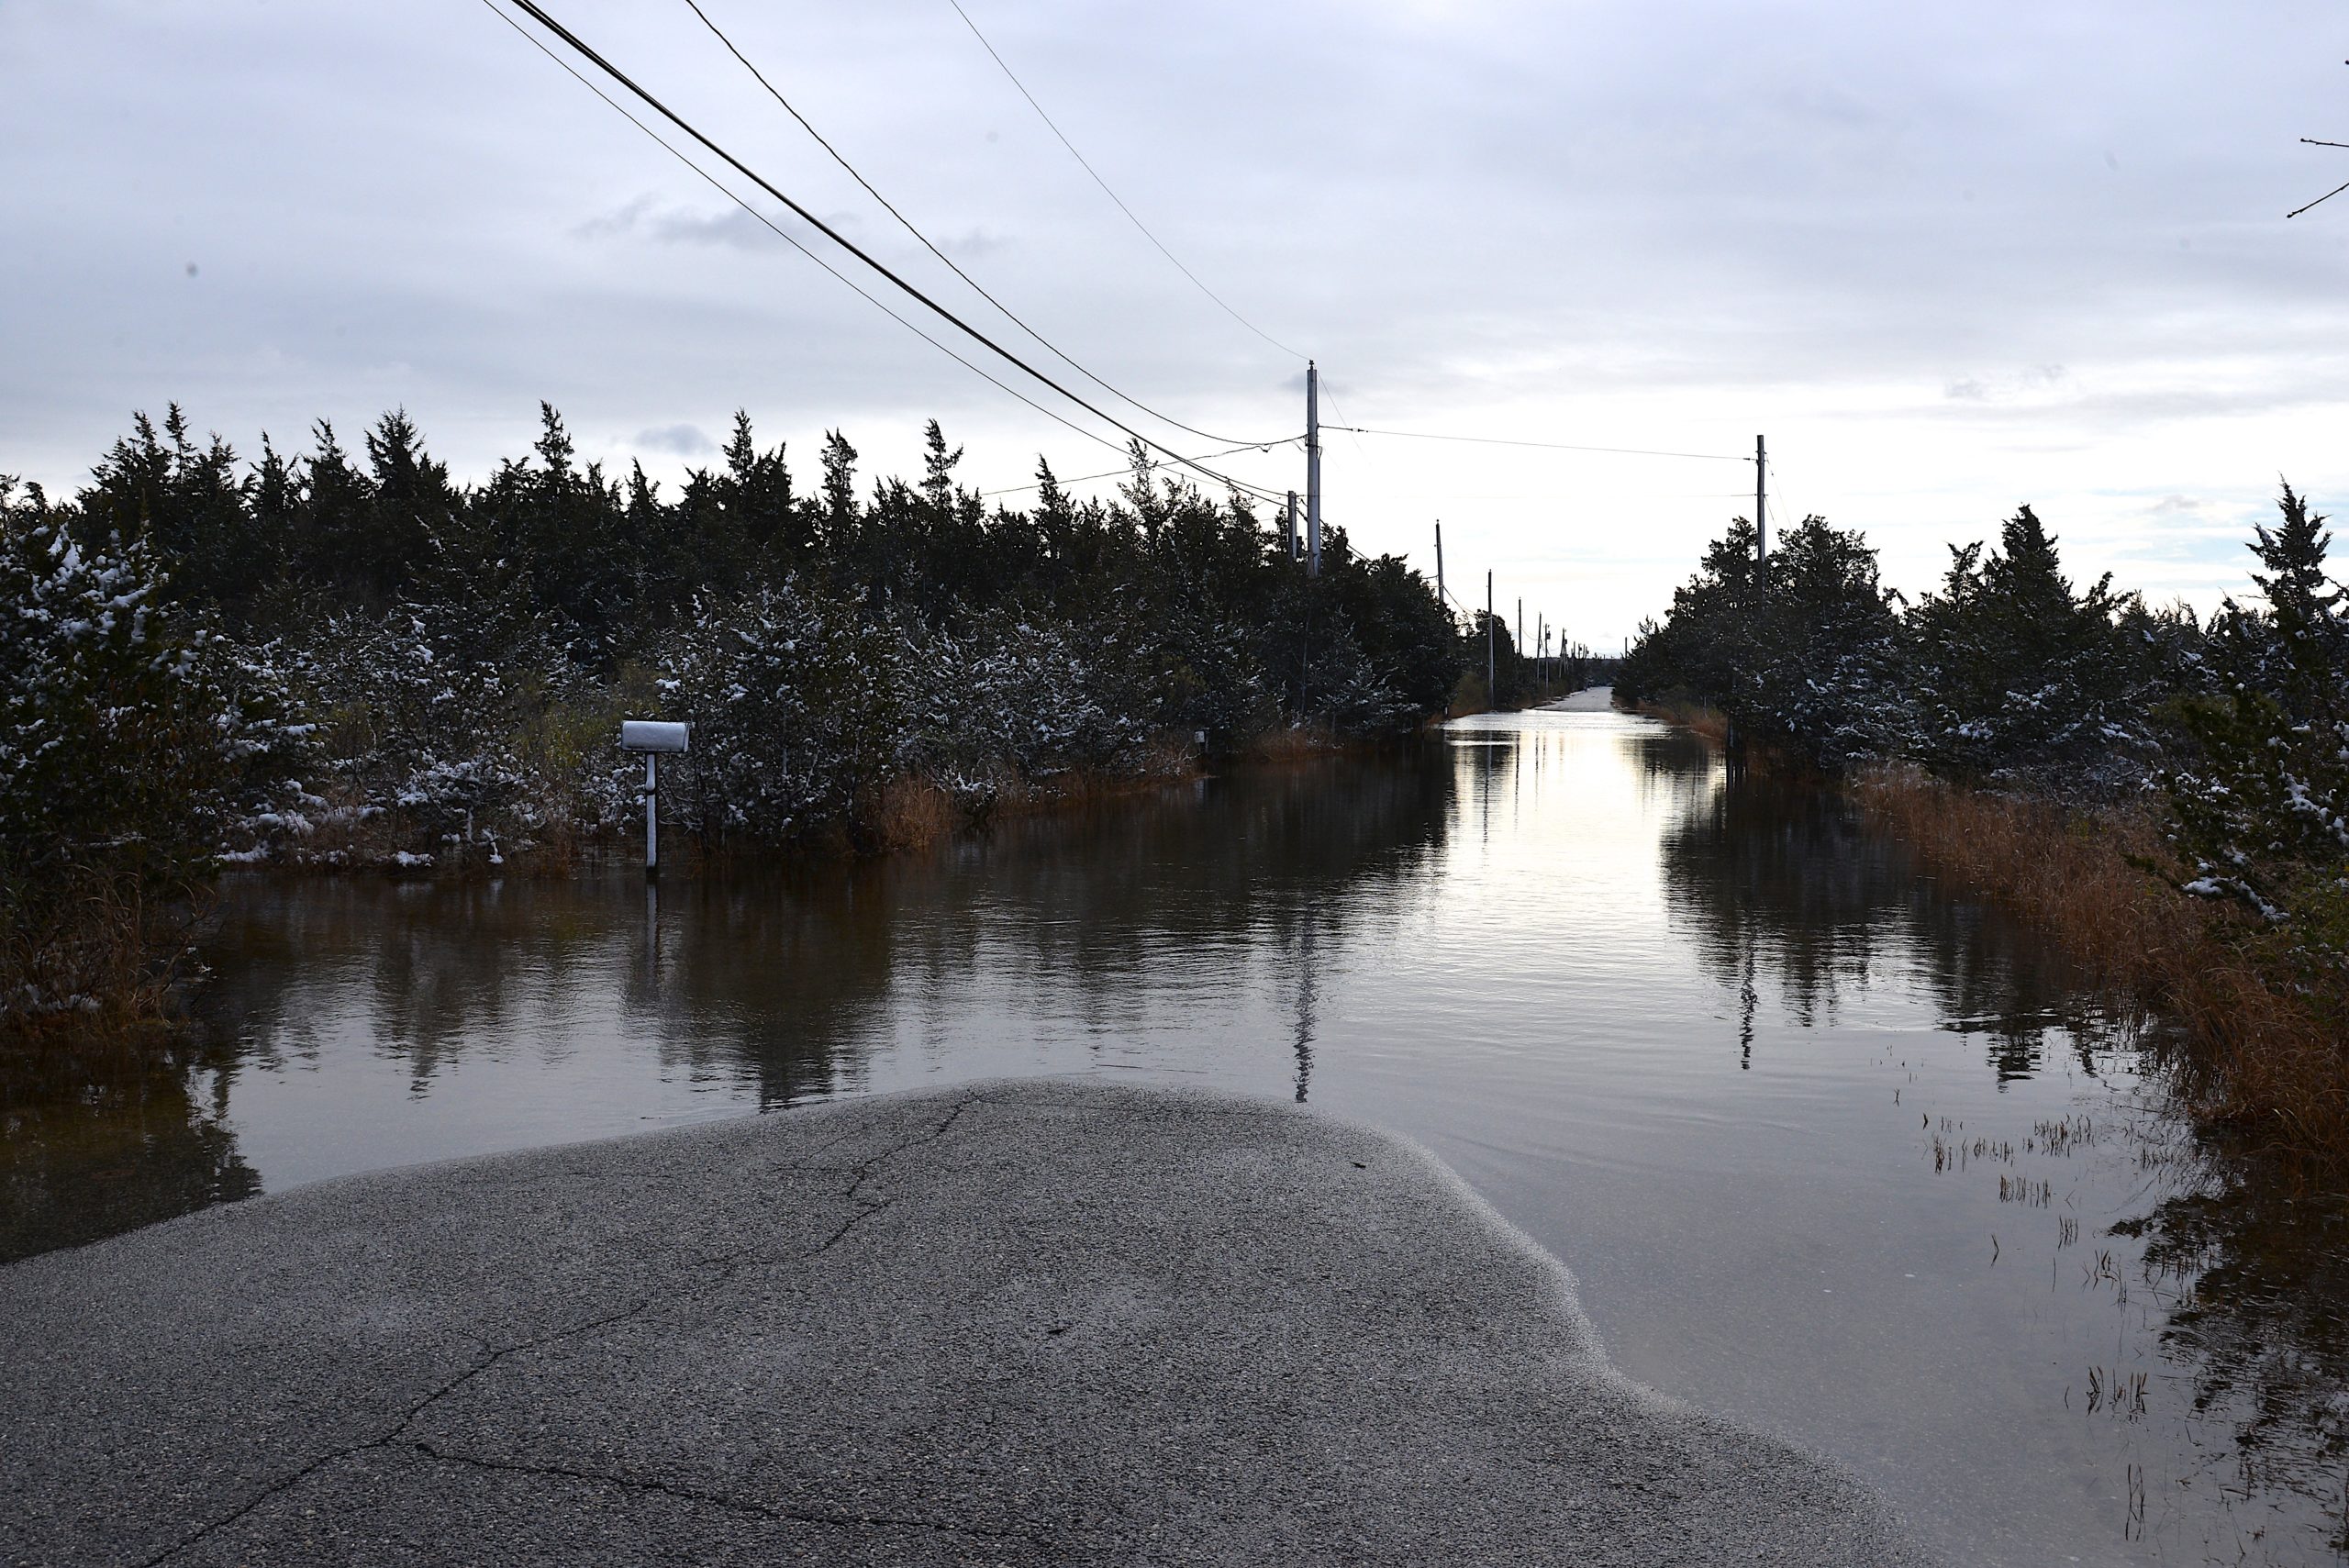 Gerard Drive, which already suffers from chronic flooding during storm tides, is one of the areas consultants are weighing how residents can manage living in a threatened area as sea levels rise.  KYRIL BROMLEY